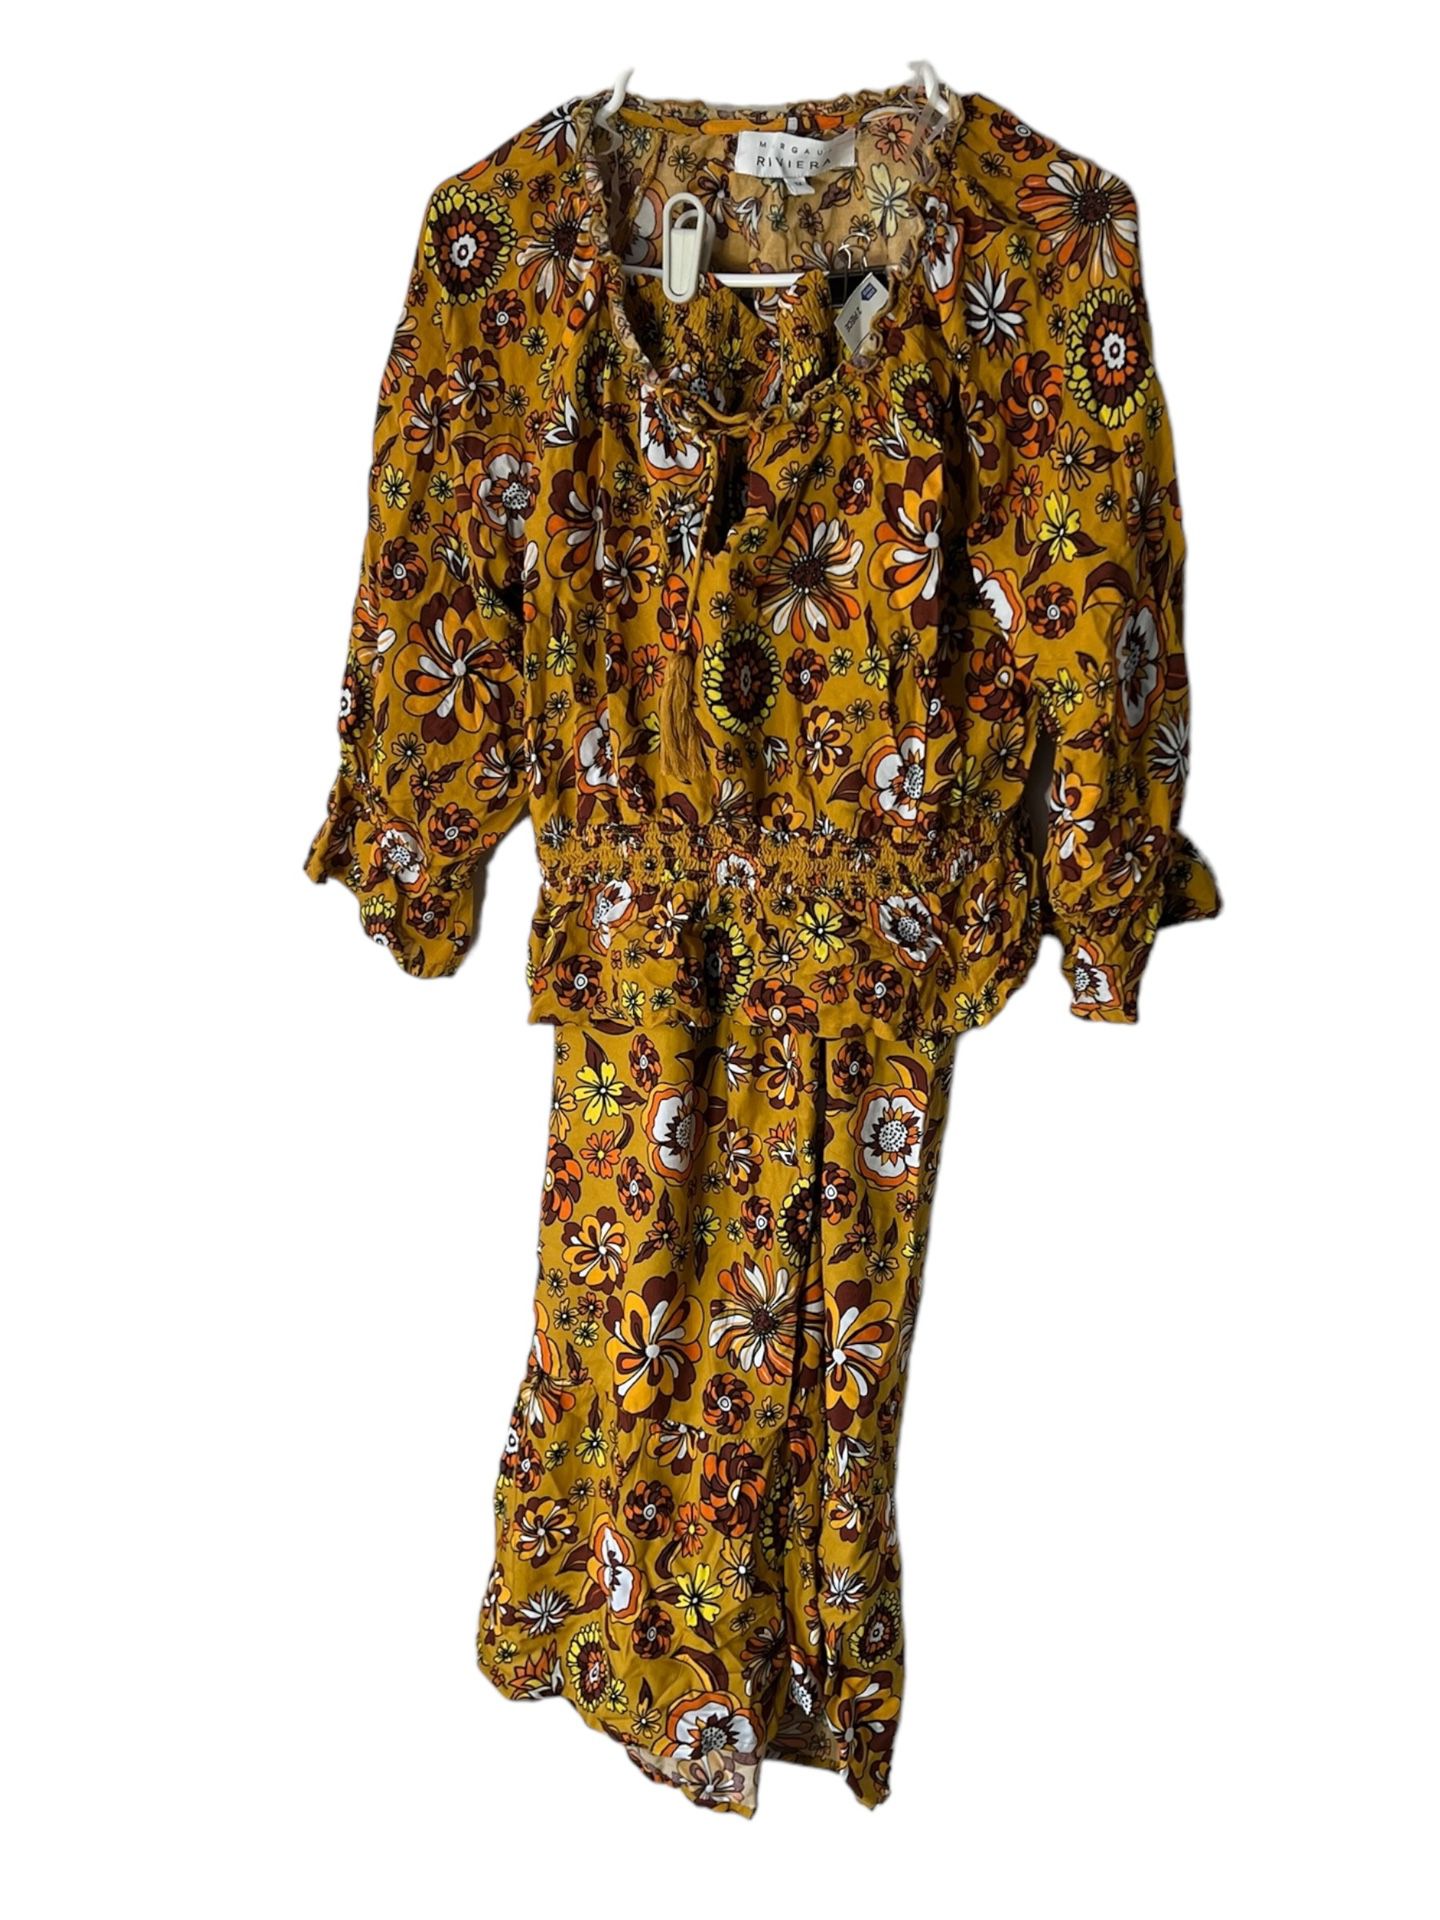 Margaux Riviera Women's Yellow Floral 2 Pieces Skirt Top Bohemian Chic Sz 1X  This Margaux Riviera women's skirt set is perfect for any occasion, whet